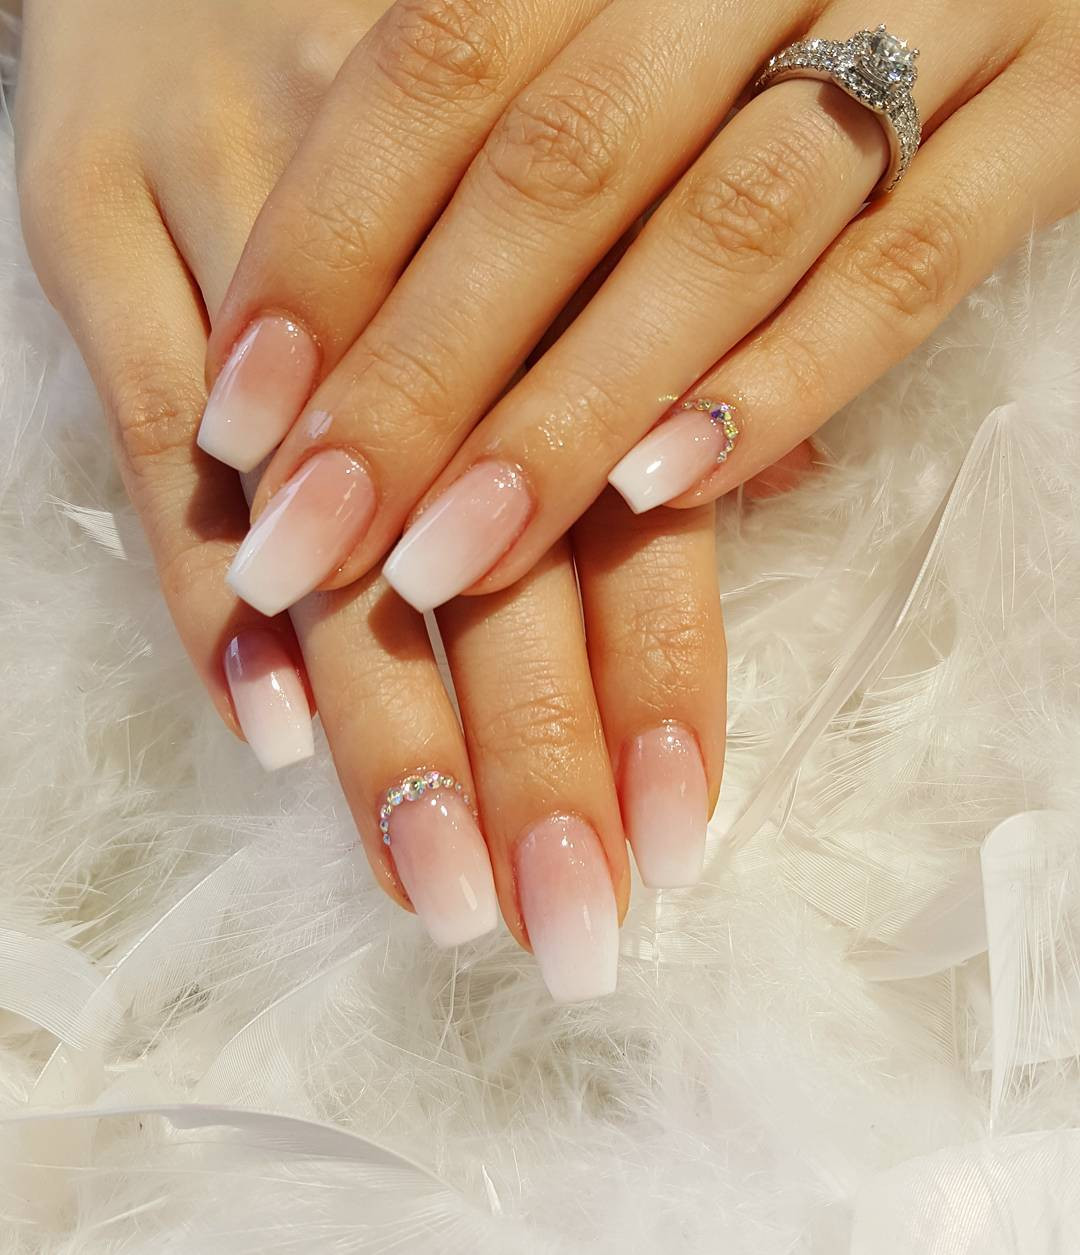 Classiest Nail Colors
 40 Manicure Inspiration Ideas with These Classy Nail Designs